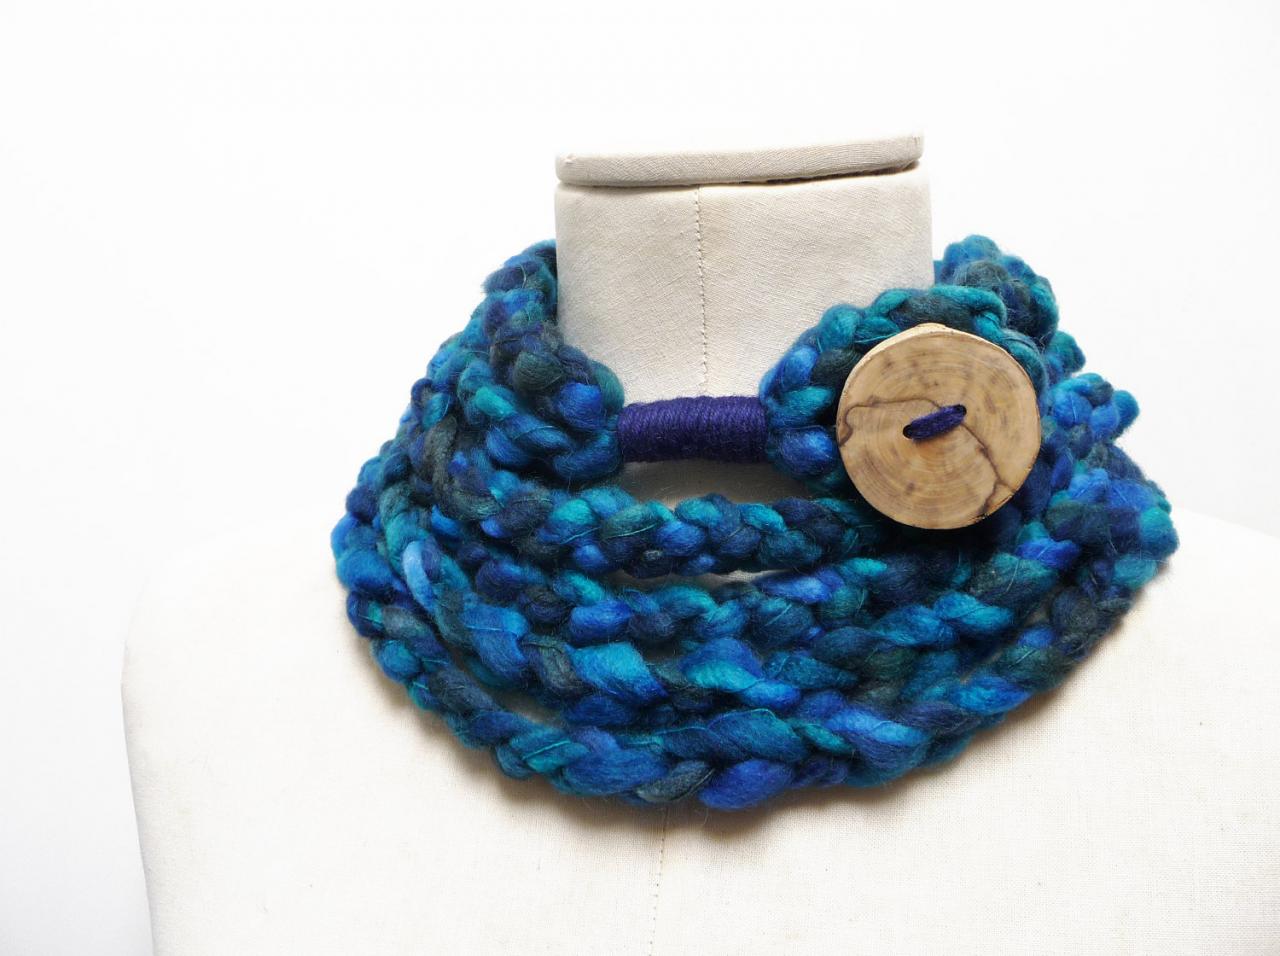 Loop Infinity Scarf Necklace, Crochet Scarflette Neckwarmer - Blue, Teal, Turquoise Multicolor Yarn With Giant Wood Button